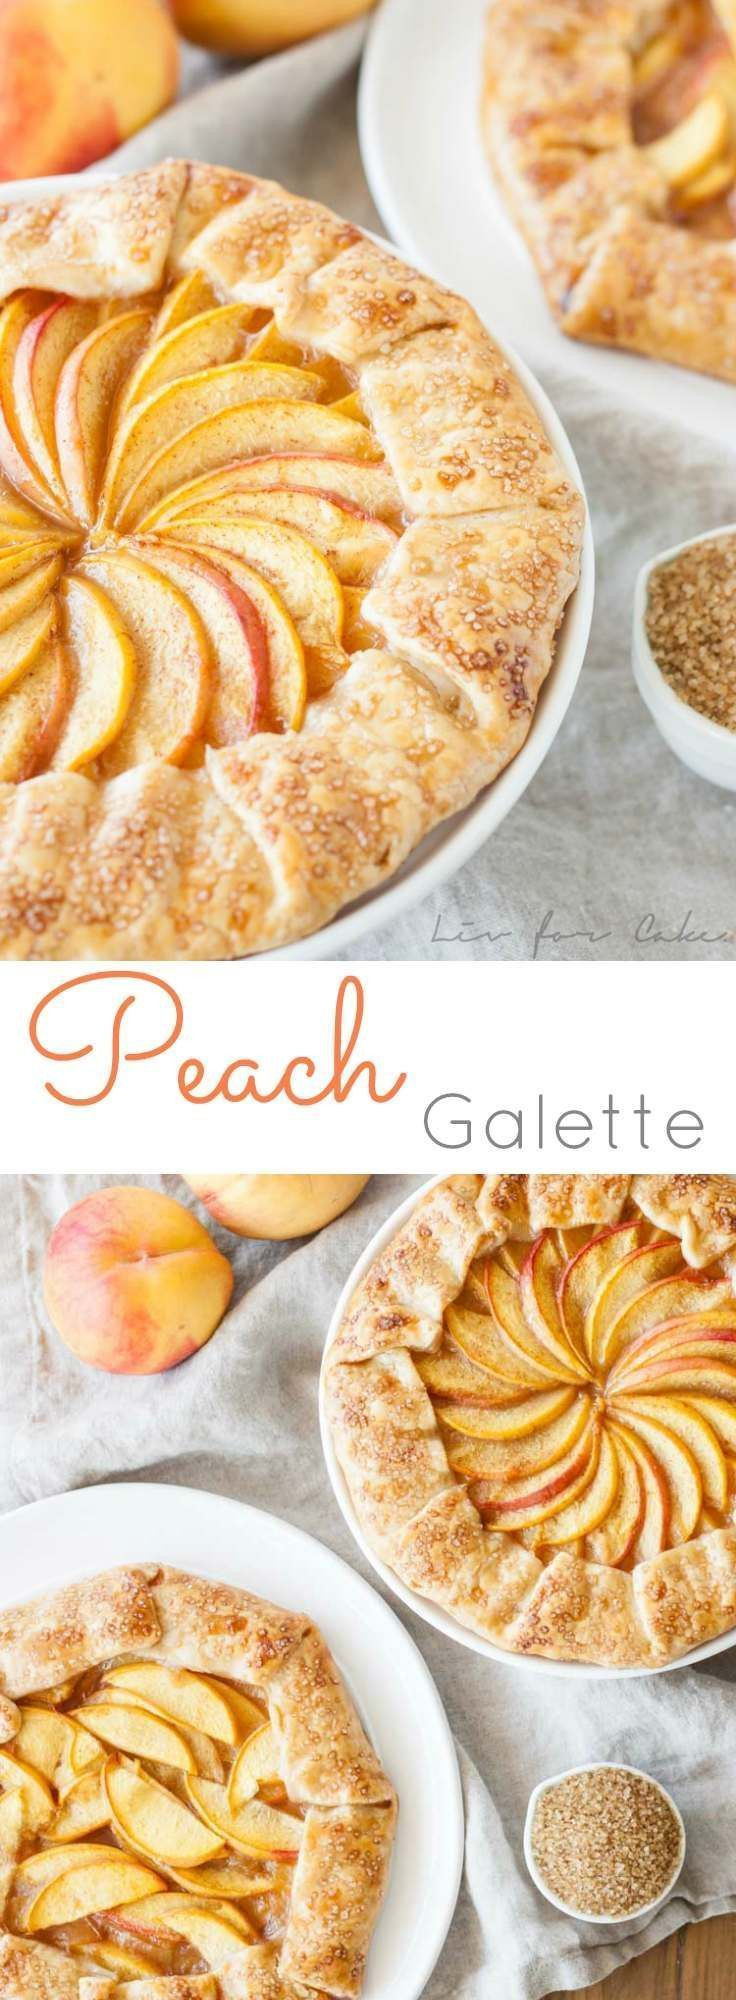 Desserts With Peaches Quick And Easy
 Pretty in Peach galette Quick easy and perfect for